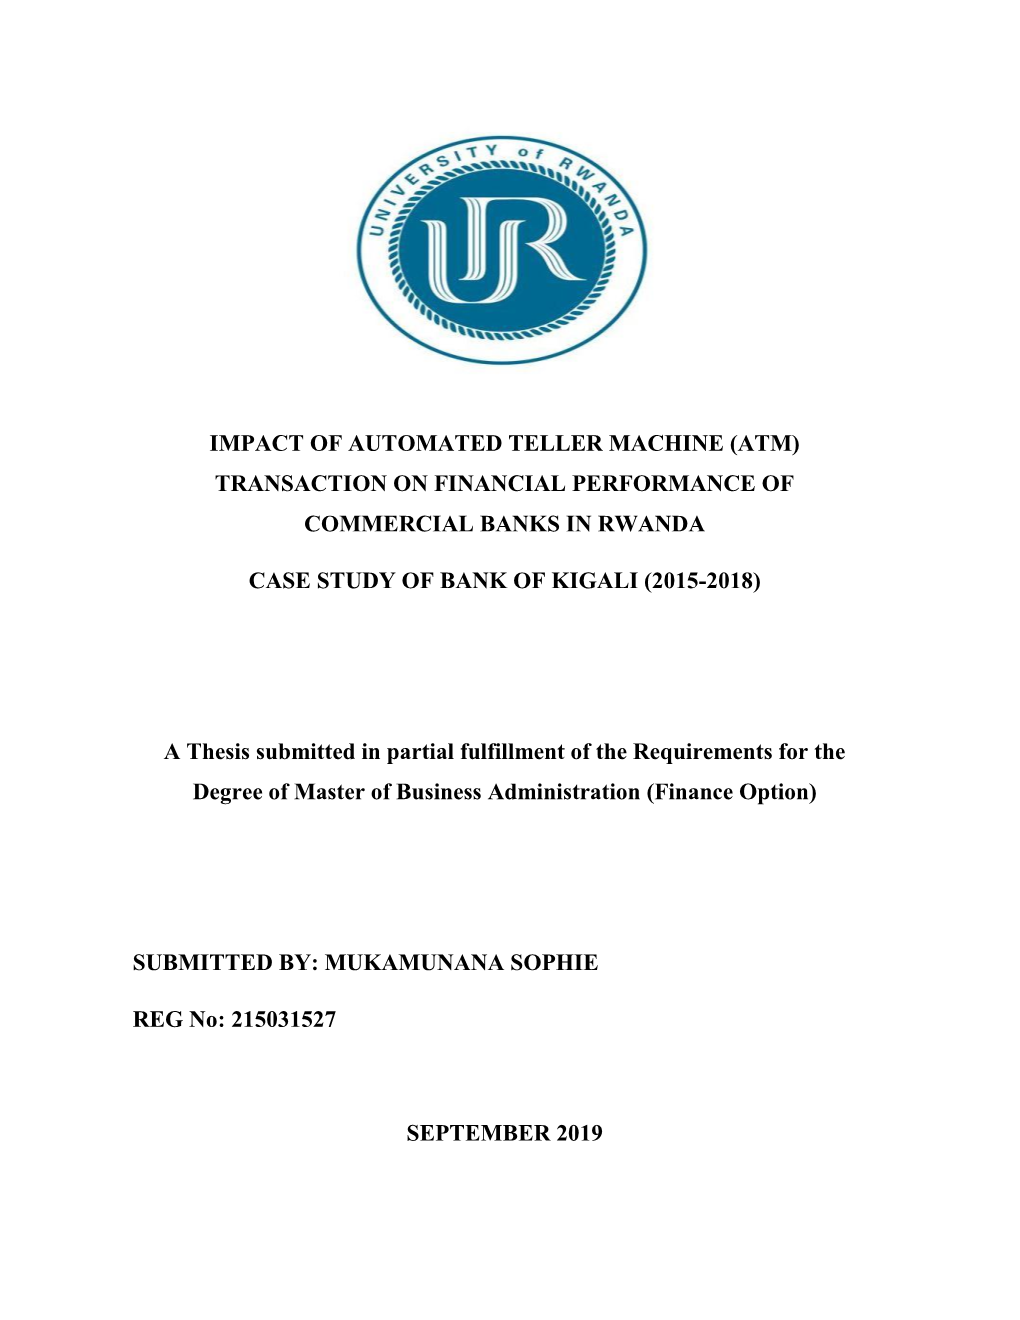 Impact of Automated Teller Machine (Atm) Transaction on Financial Performance of Commercial Banks in Rwanda